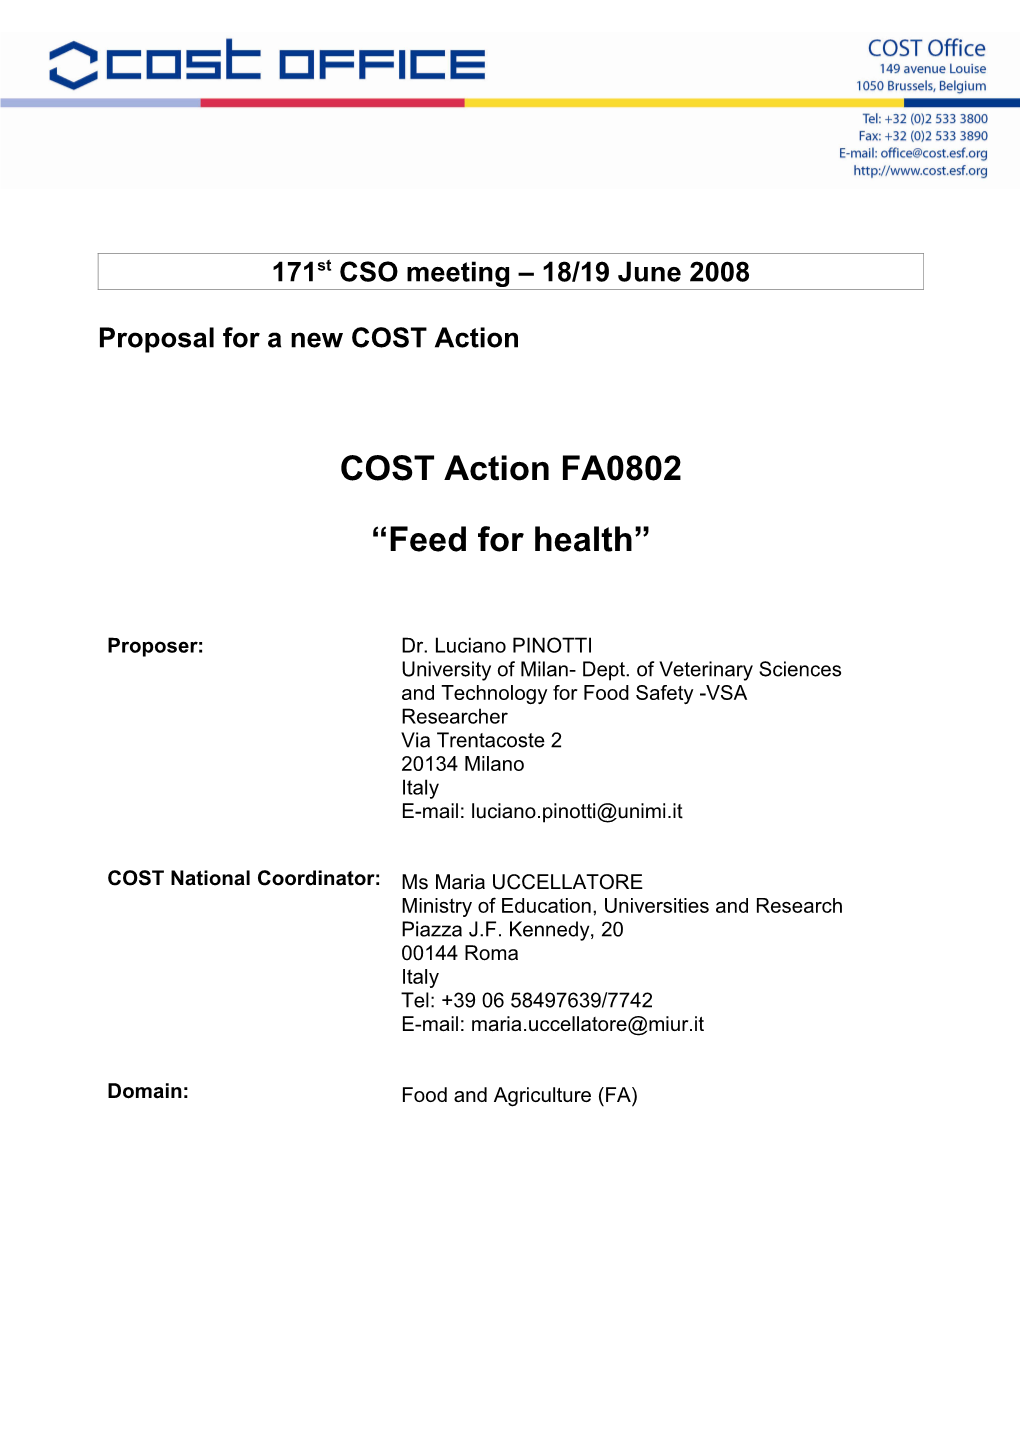 Proposal for a New COST Action